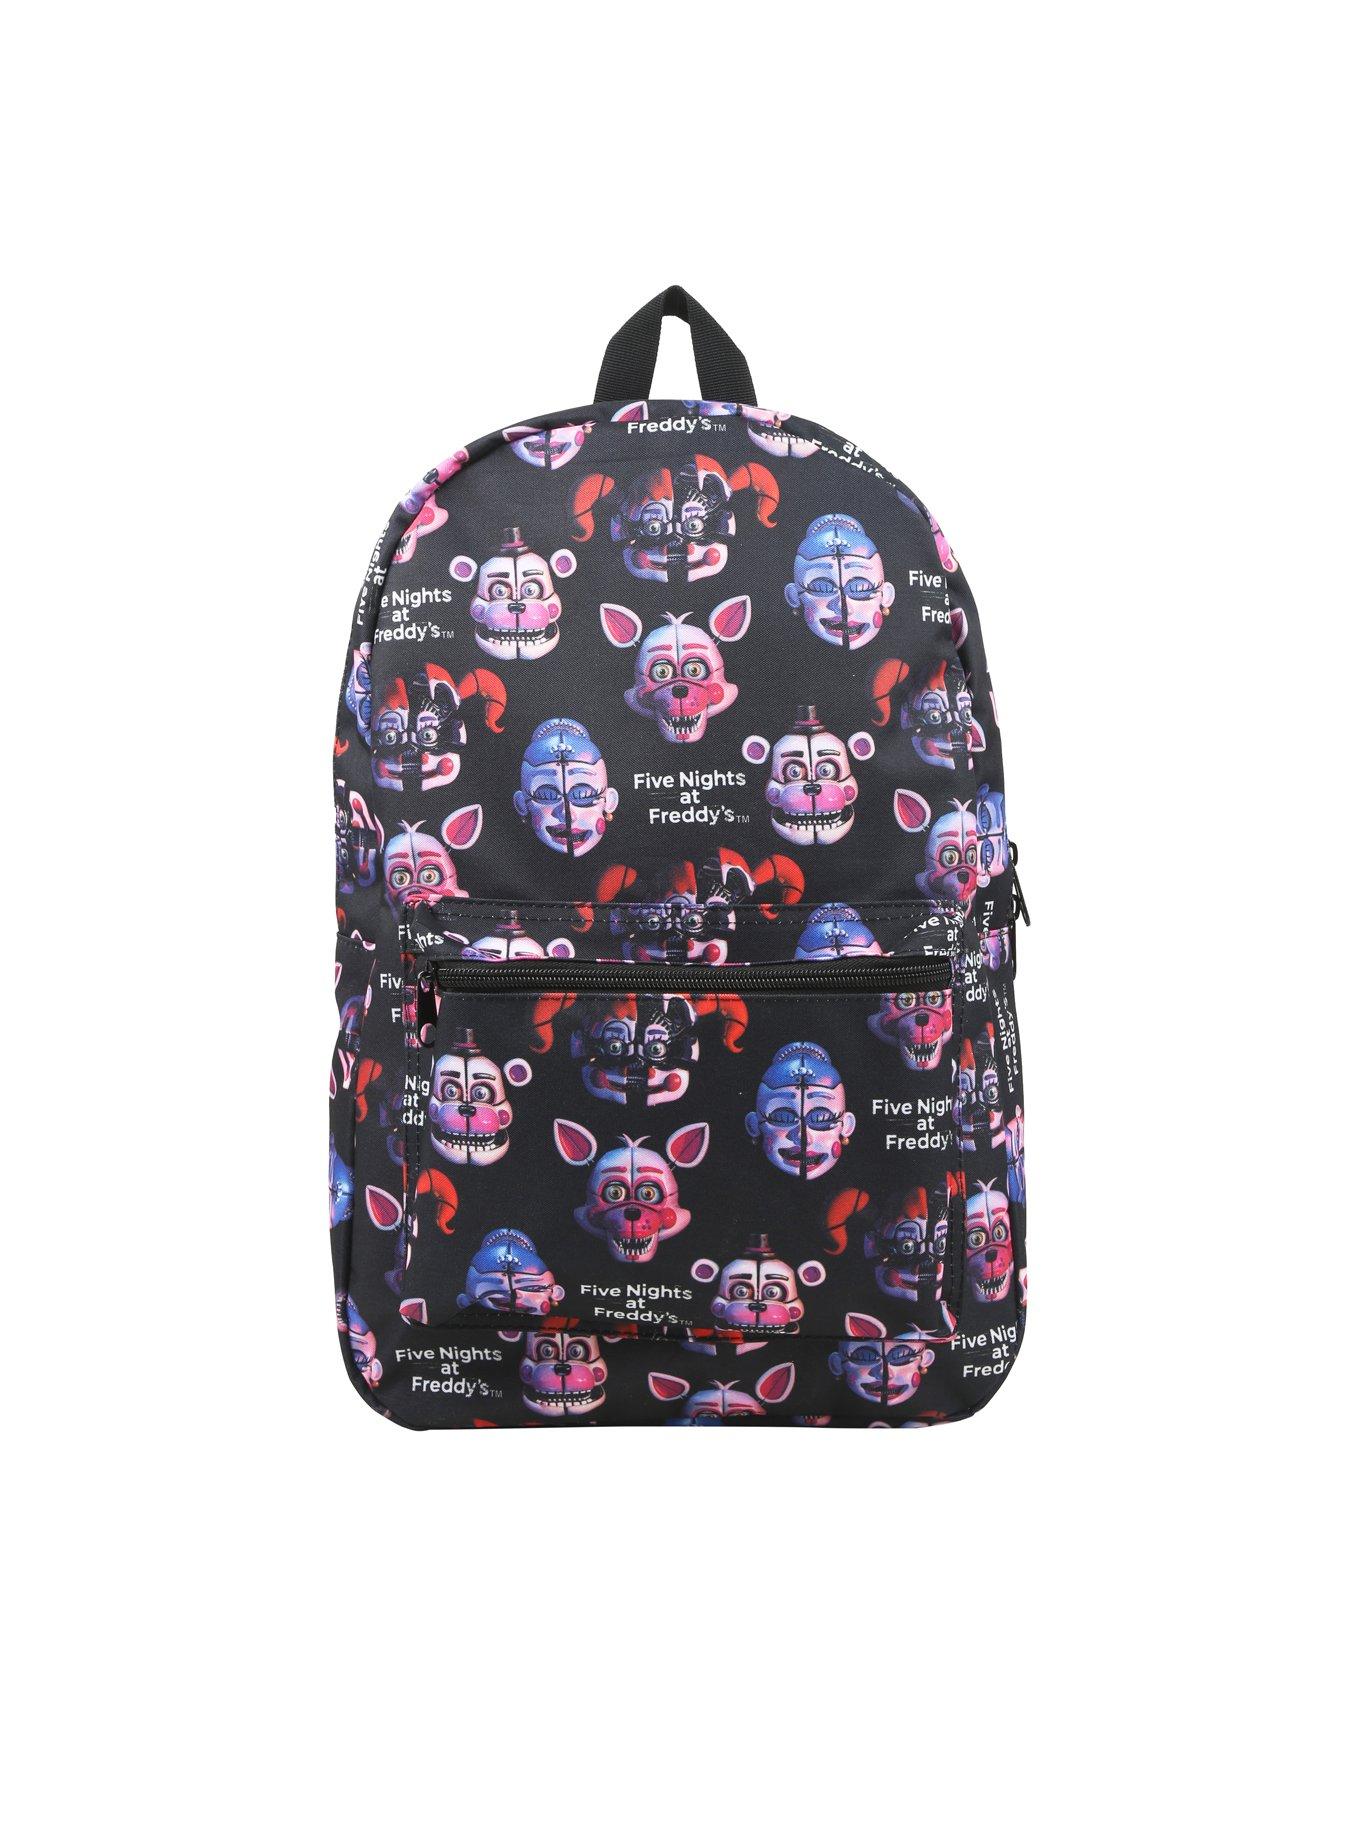 Five Nights At Freddy's: Sister Location Print Backpack, , hi-res